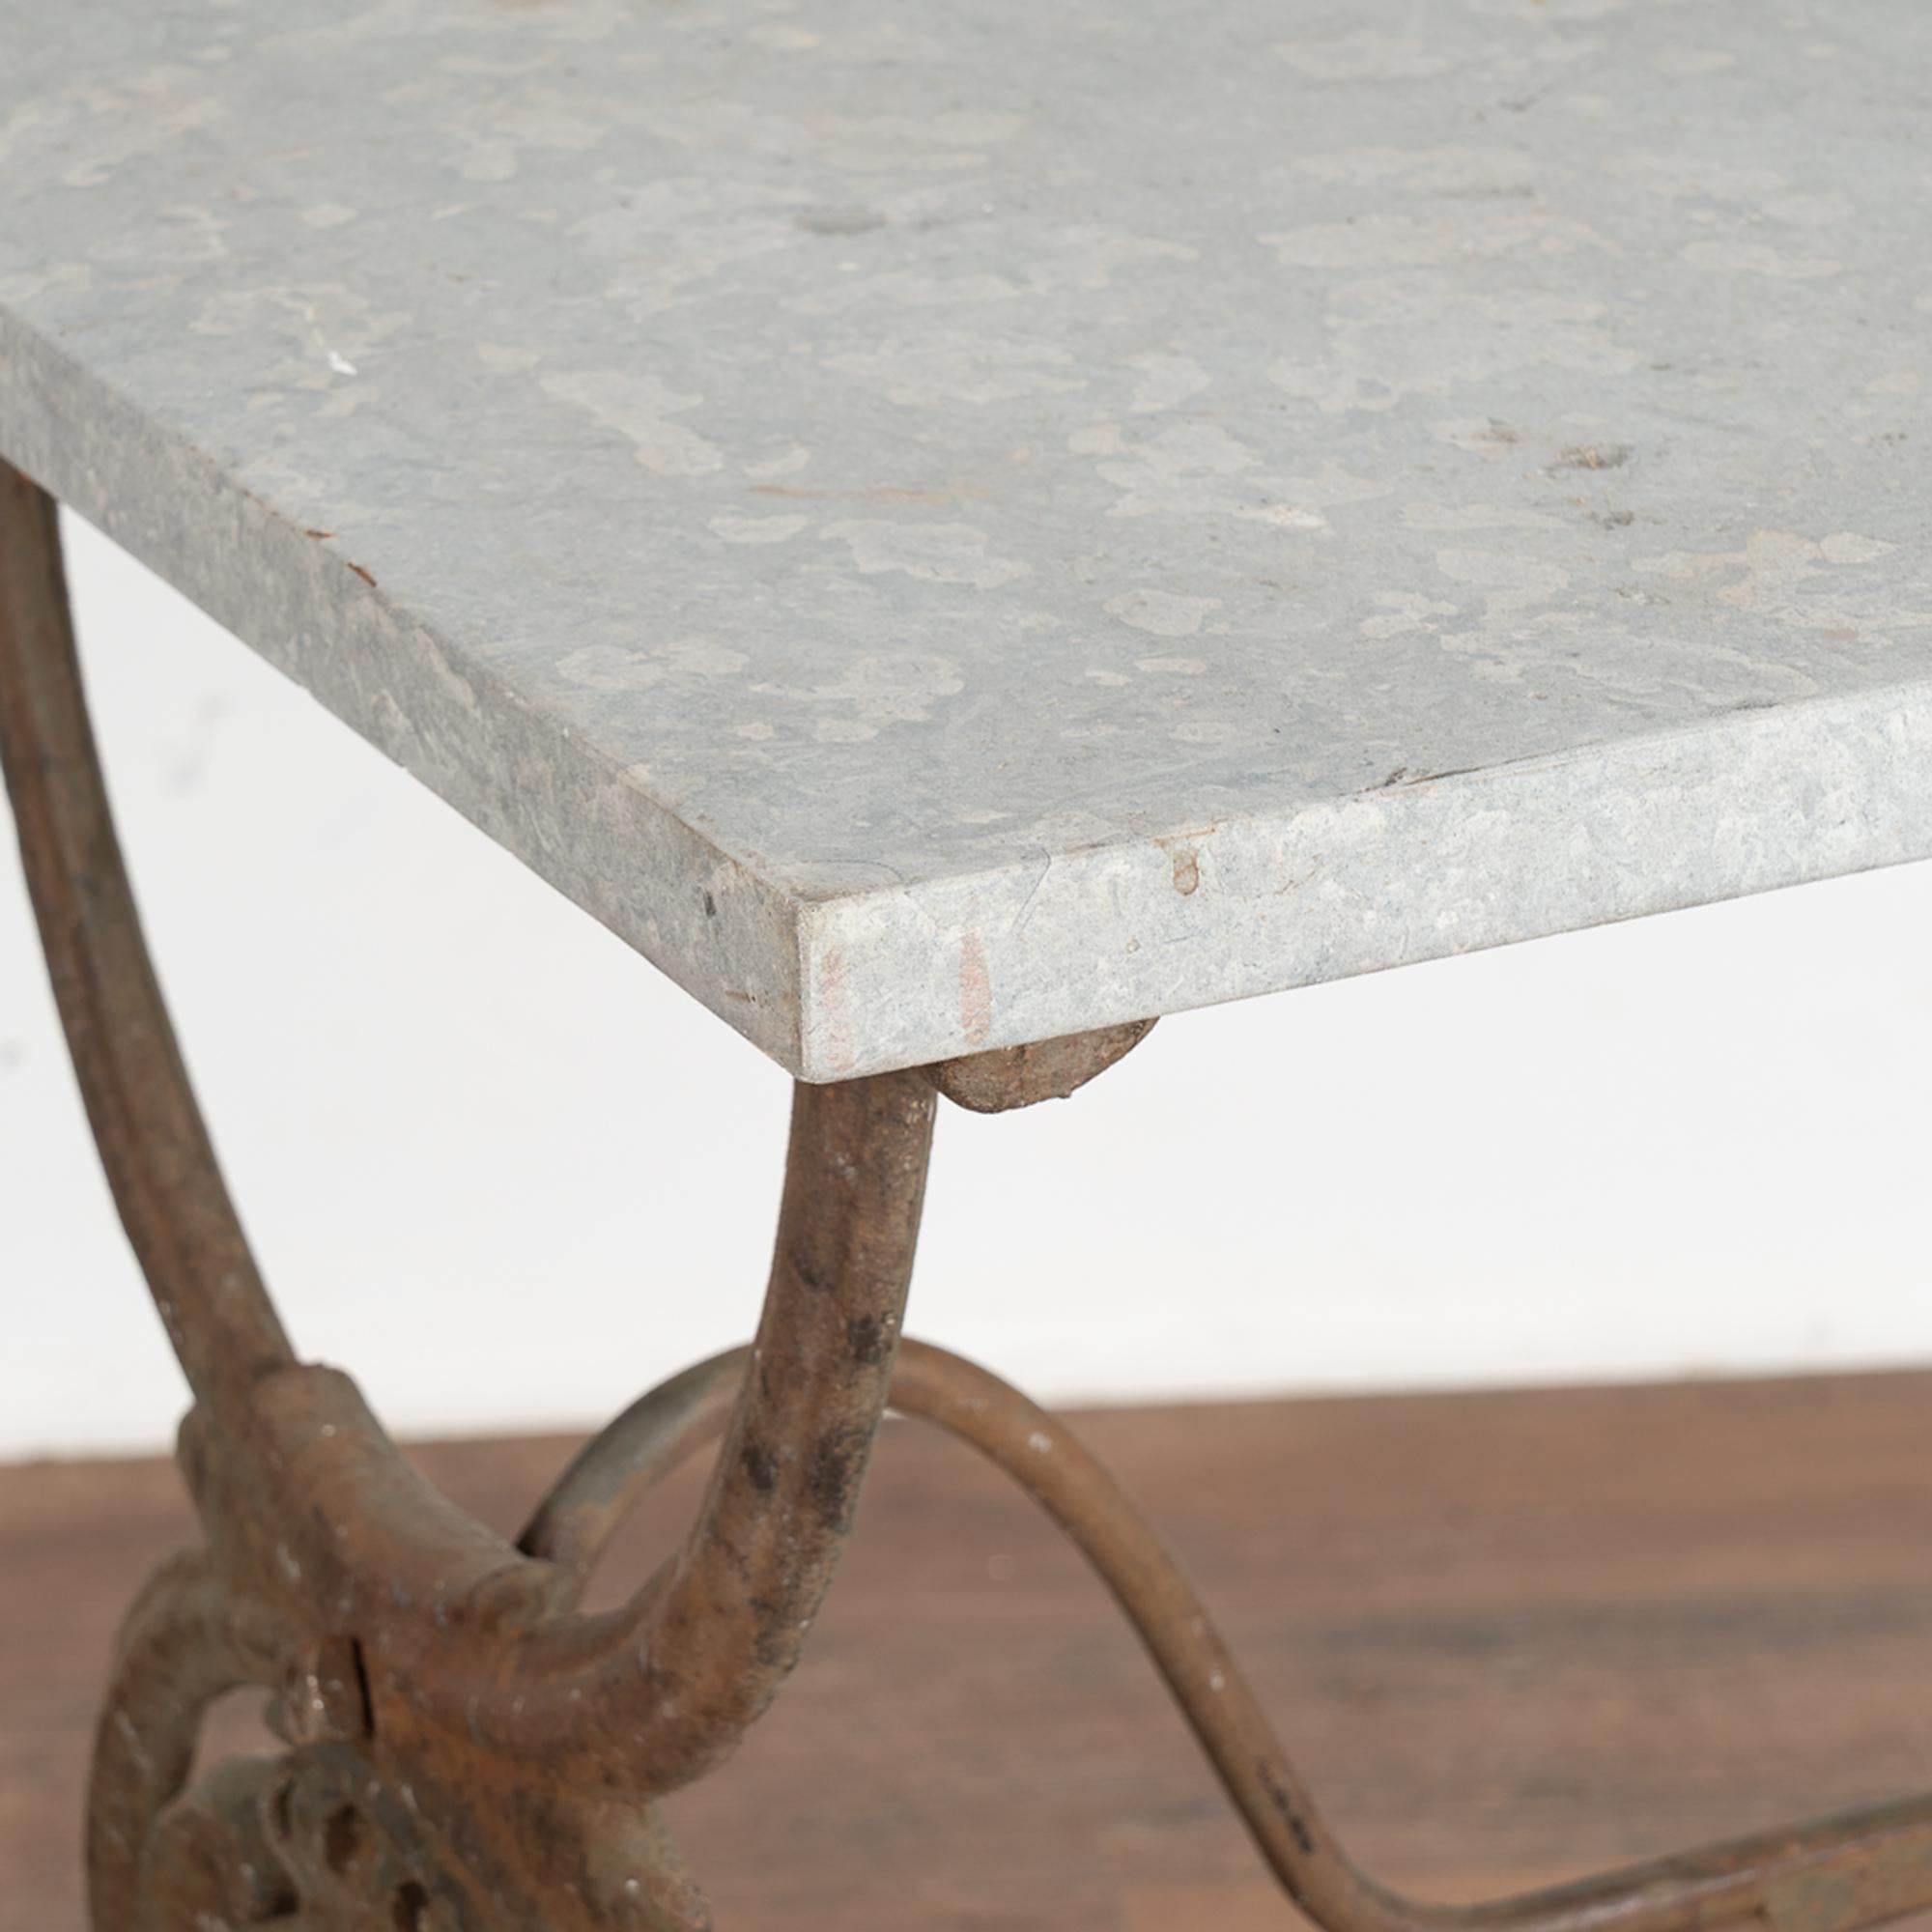 Stone Top Iron Base Side Table, Sweden circa 1880 For Sale 2